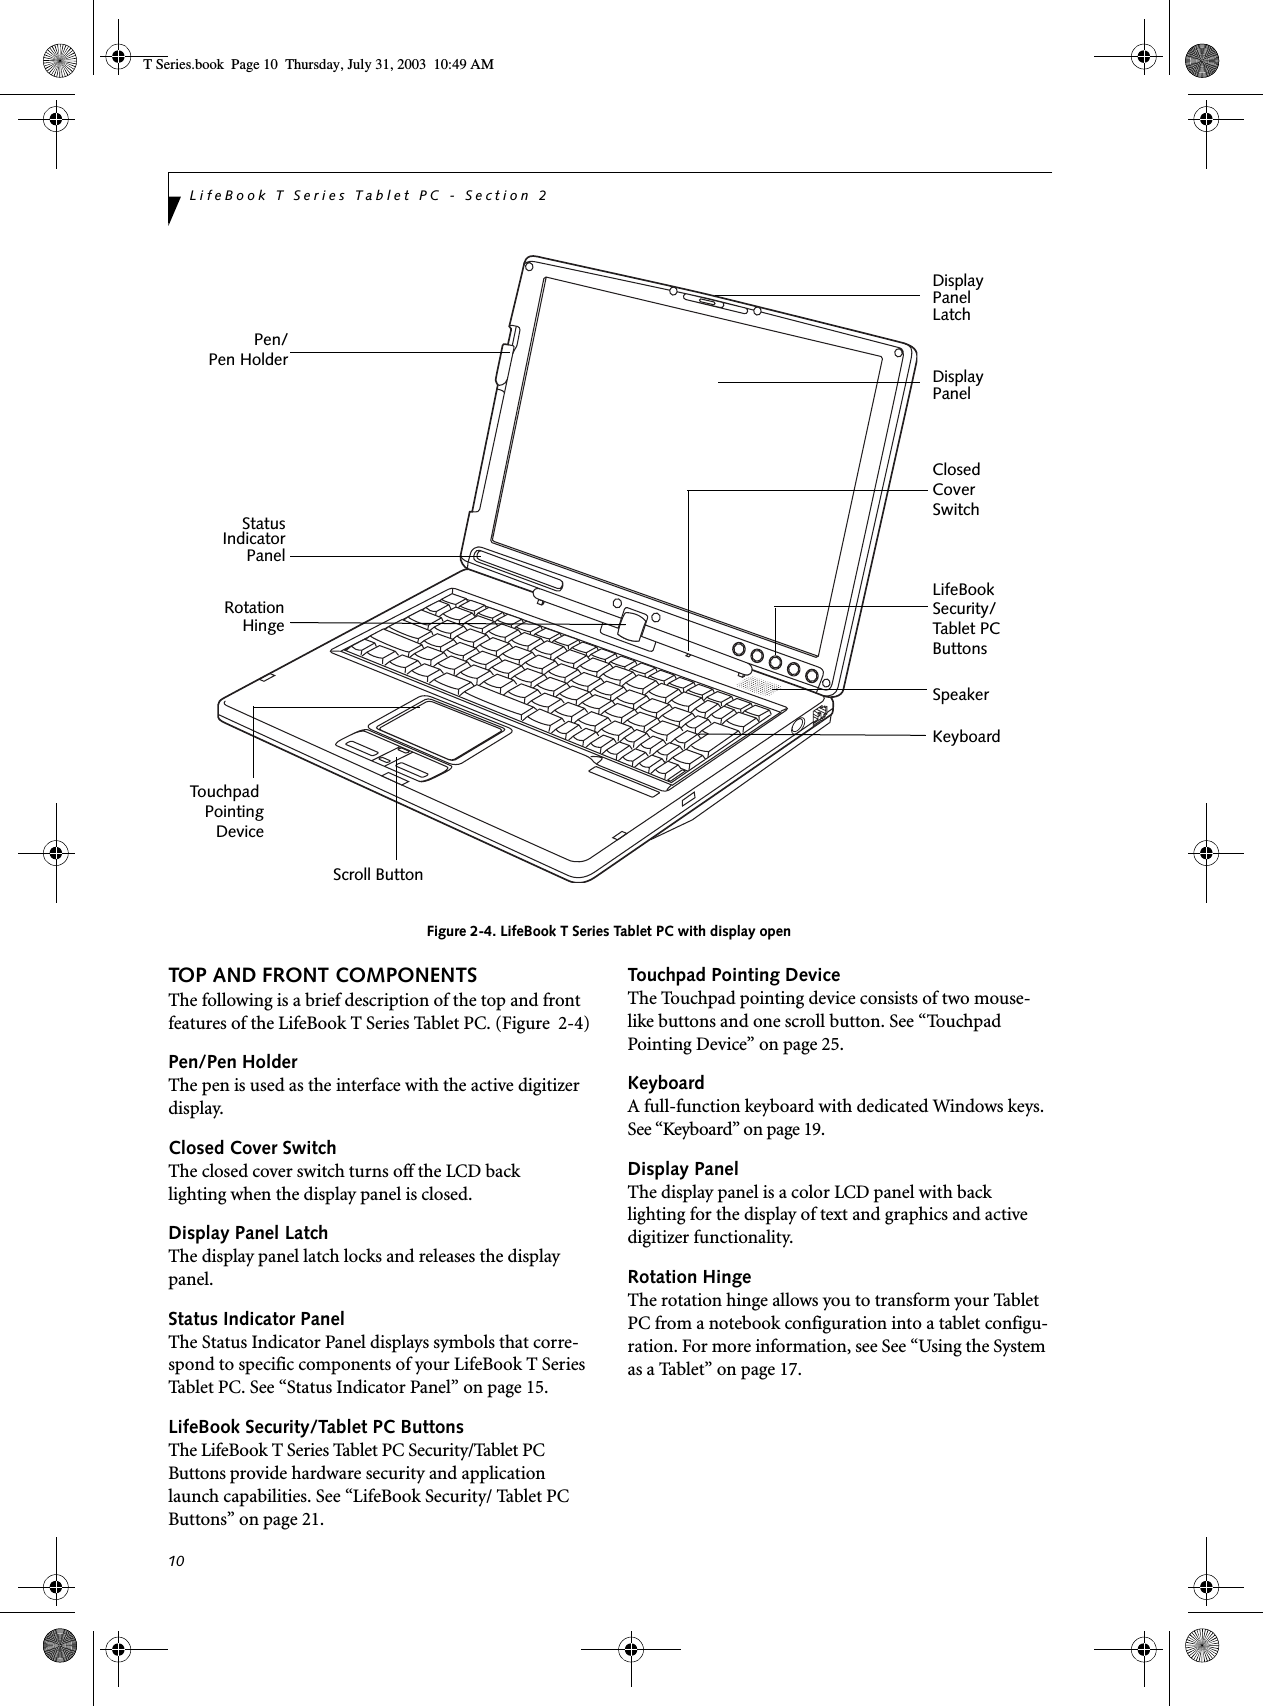 10LifeBook T Series Tablet PC - Section 2Figure 2-4. LifeBook T Series Tablet PC with display openTOP AND FRONT COMPONENTSThe following is a brief description of the top and front features of the LifeBook T Series Tablet PC. (Figure  2-4)Pen/Pen HolderThe pen is used as the interface with the active digitizer display.Closed Cover SwitchThe closed cover switch turns off the LCD back lighting when the display panel is closed. Display Panel LatchThe display panel latch locks and releases the display panel. Status Indicator PanelThe Status Indicator Panel displays symbols that corre-spond to specific components of your LifeBook T Series Tablet PC. See “Status Indicator Panel” on page 15.LifeBook Security/Tablet PC ButtonsThe LifeBook T Series Tablet PC Security/Tablet PC Buttons provide hardware security and application launch capabilities. See “LifeBook Security/ Tablet PC Buttons” on page 21.Touchpad Pointing DeviceThe Touchpad pointing device consists of two mouse-like buttons and one scroll button. See “Touchpad Pointing Device” on page 25.KeyboardA full-function keyboard with dedicated Windows keys. See “Keyboard” on page 19.Display PanelThe display panel is a color LCD panel with back lighting for the display of text and graphics and active digitizer functionality. Rotation HingeThe rotation hinge allows you to transform your Tablet PC from a notebook configuration into a tablet configu-ration. For more information, see See “Using the System as a Tablet” on page 17.Display StatusKeyboardLifeBook TouchpadScroll ButtonIndicatorPanelPanelDisplay PanelLatchRotationHingeClosedCoverSwitchSecurity/PointingDeviceSpeakerPen/Pen HolderTablet PCButtonsT Series.book  Page 10  Thursday, July 31, 2003  10:49 AM